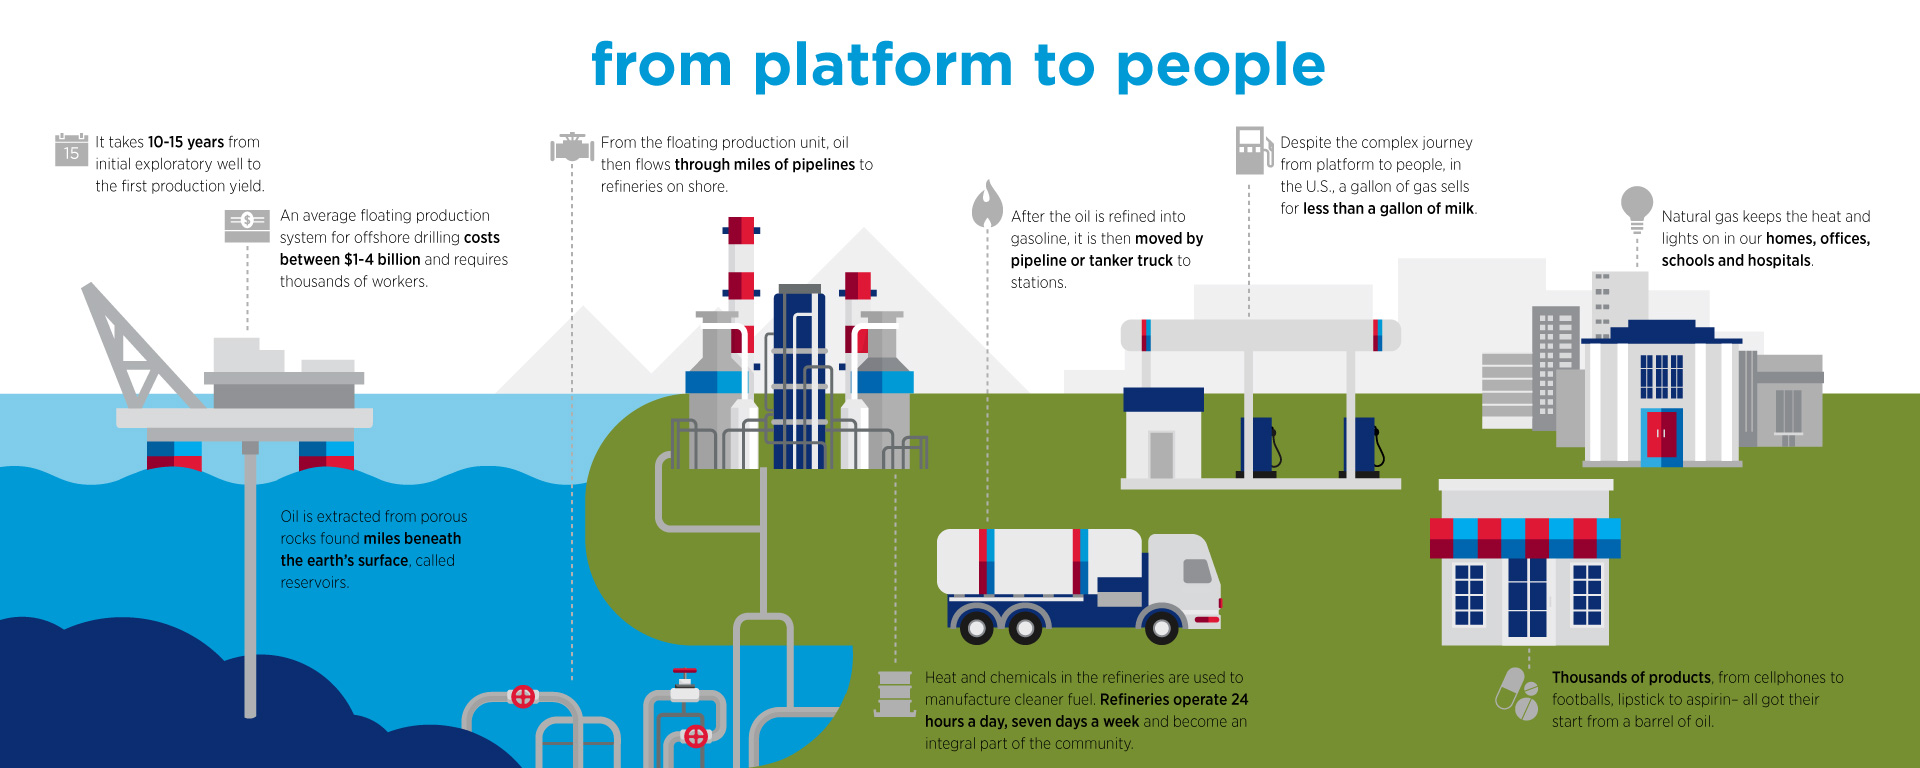 from offshore platform to people infographic